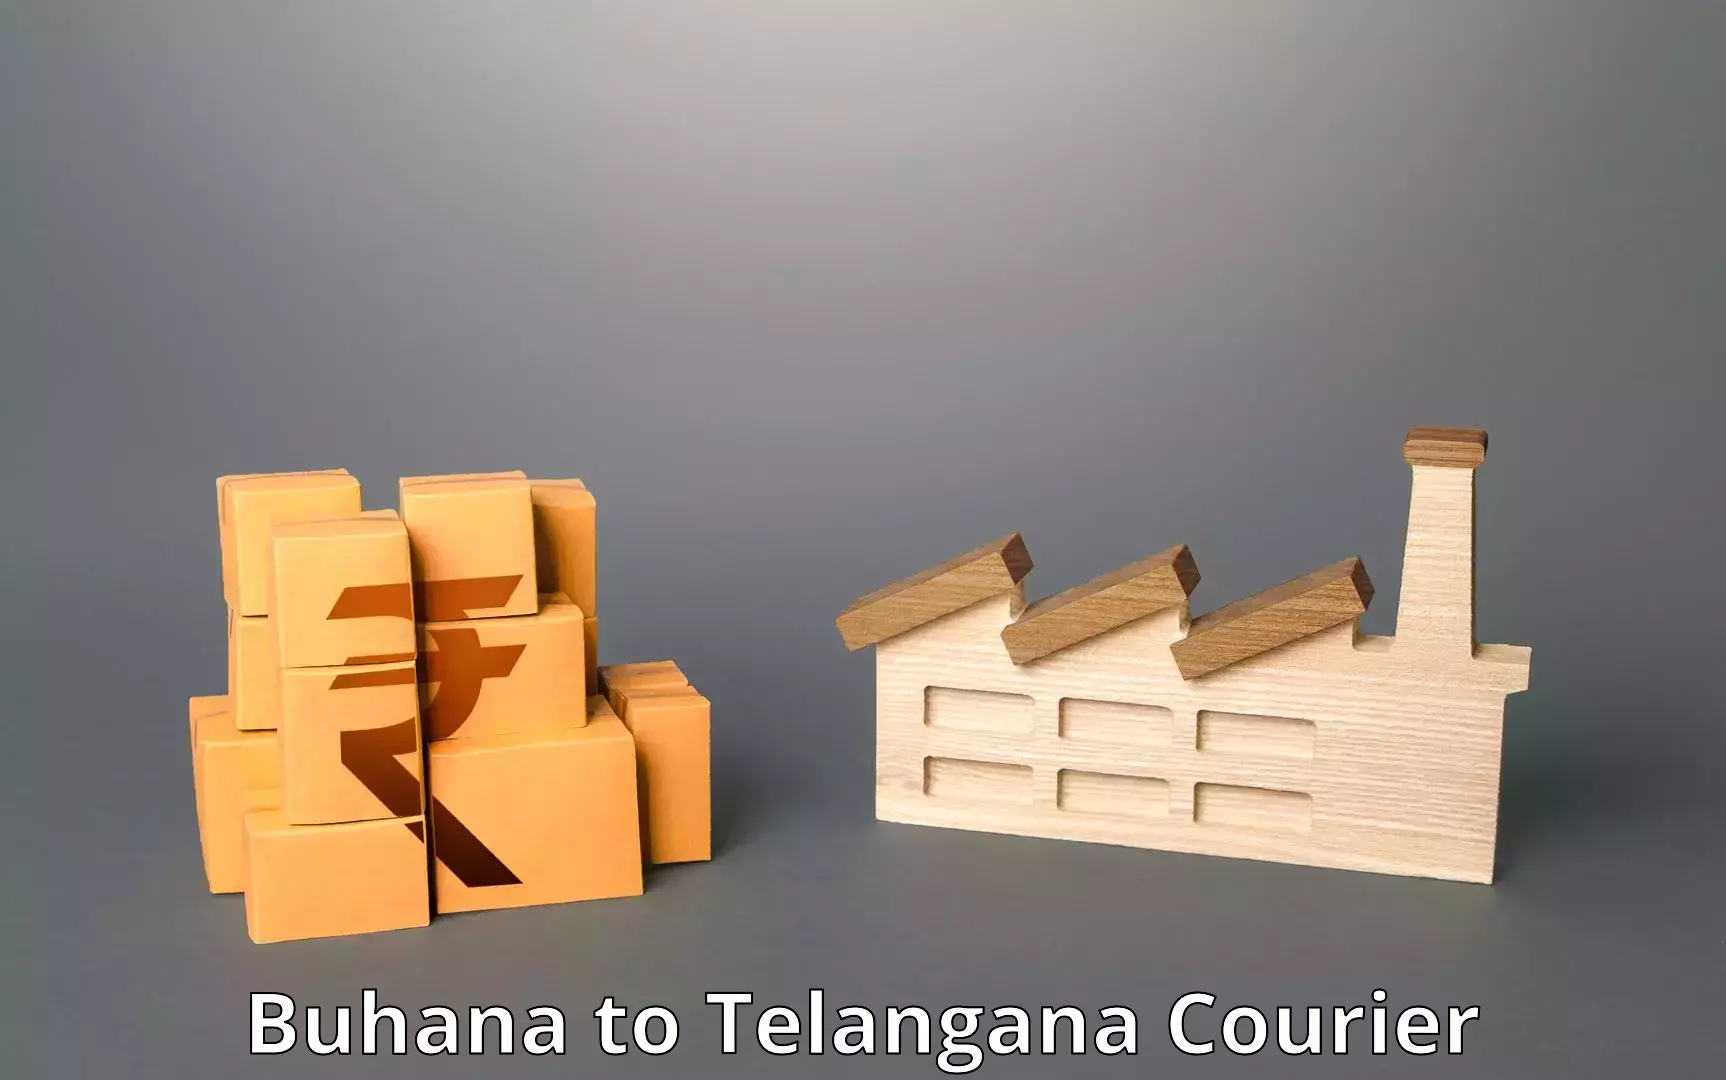 Multi-national courier services Buhana to Nereducharla